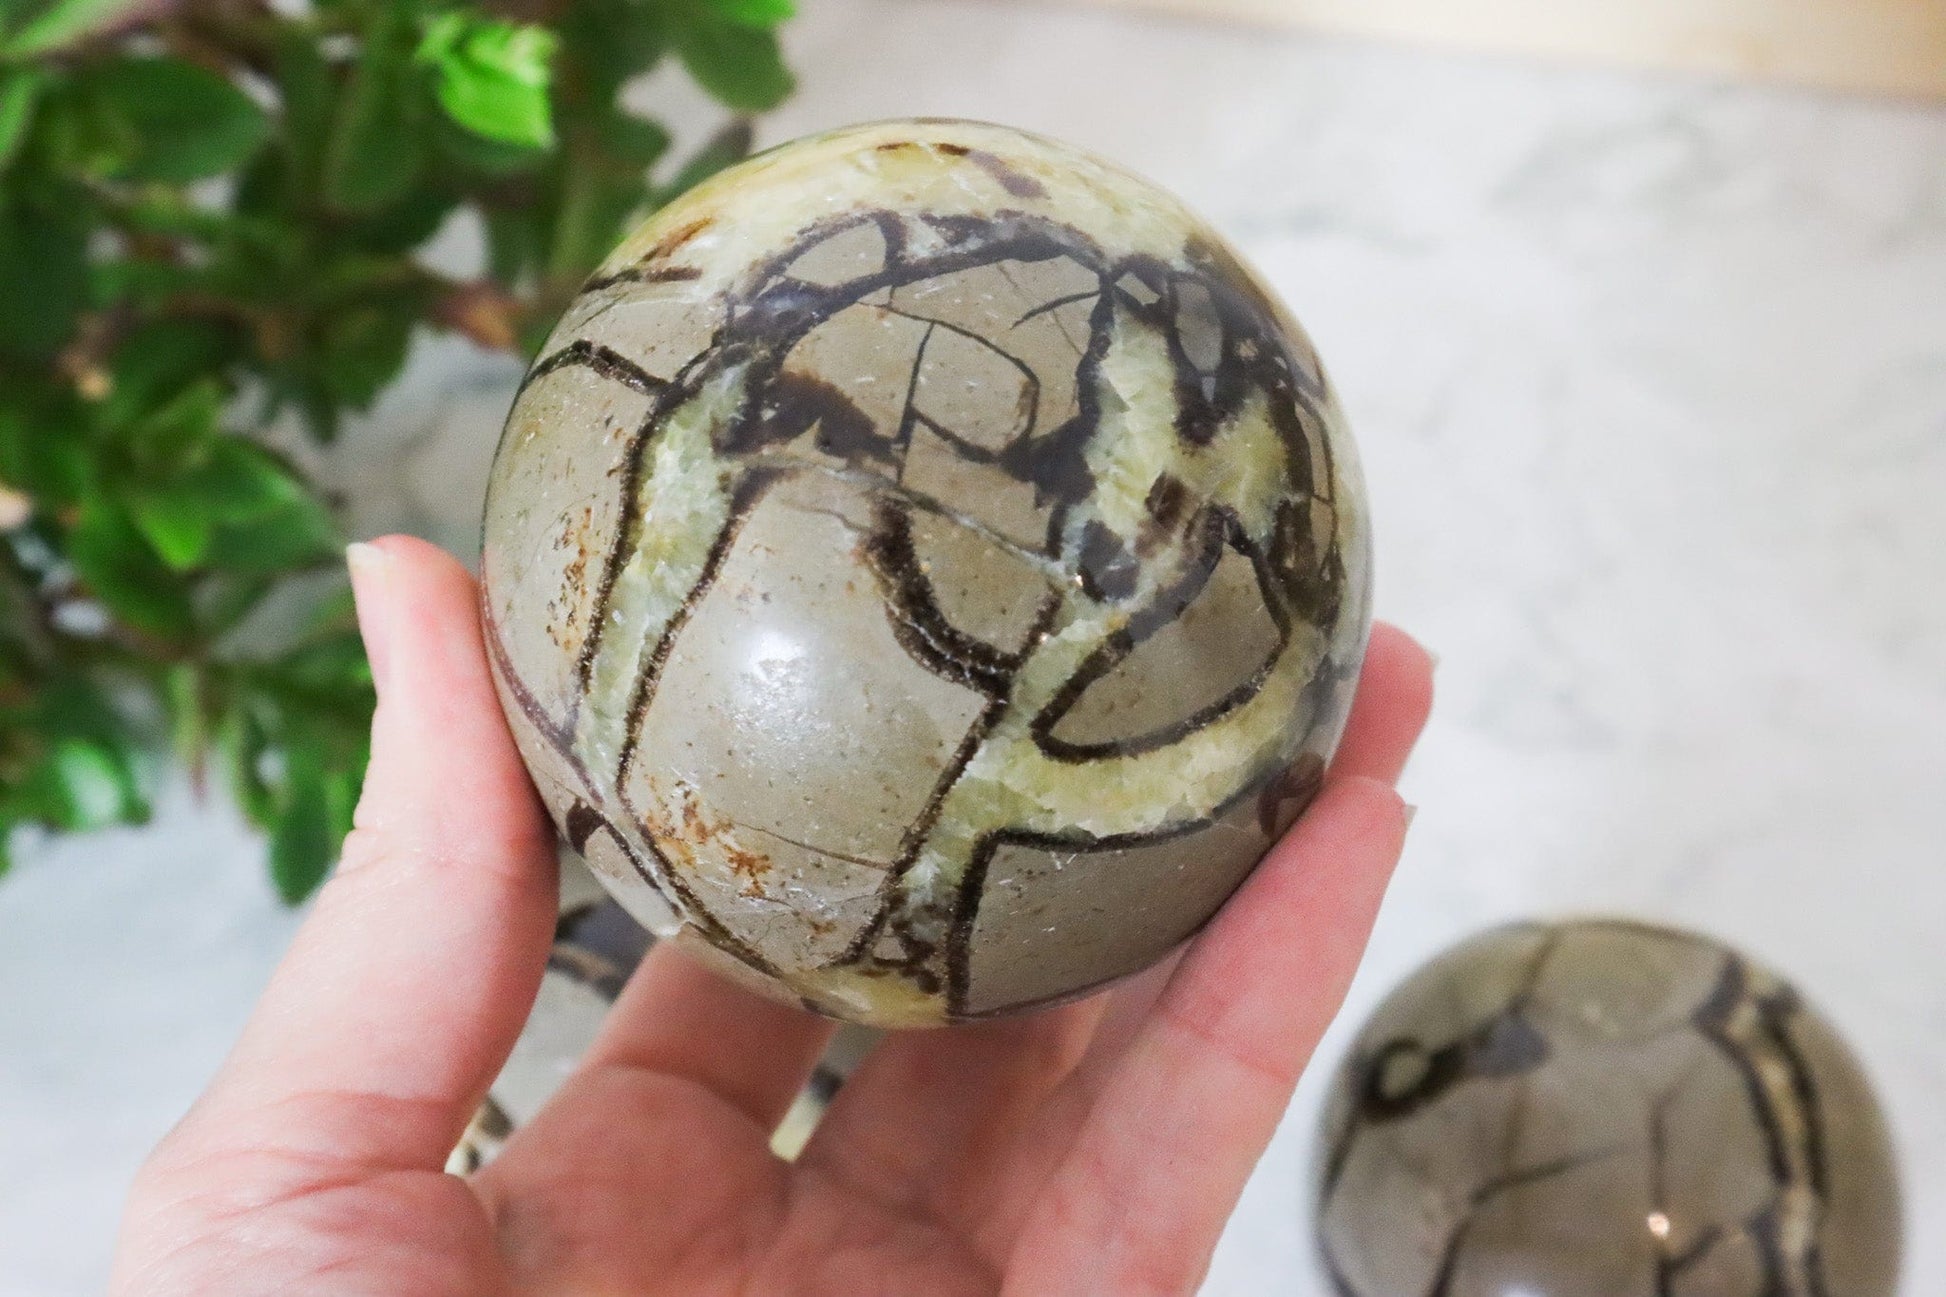 Septarian Spheres - Protection/Confidence Spheres Tali & Loz